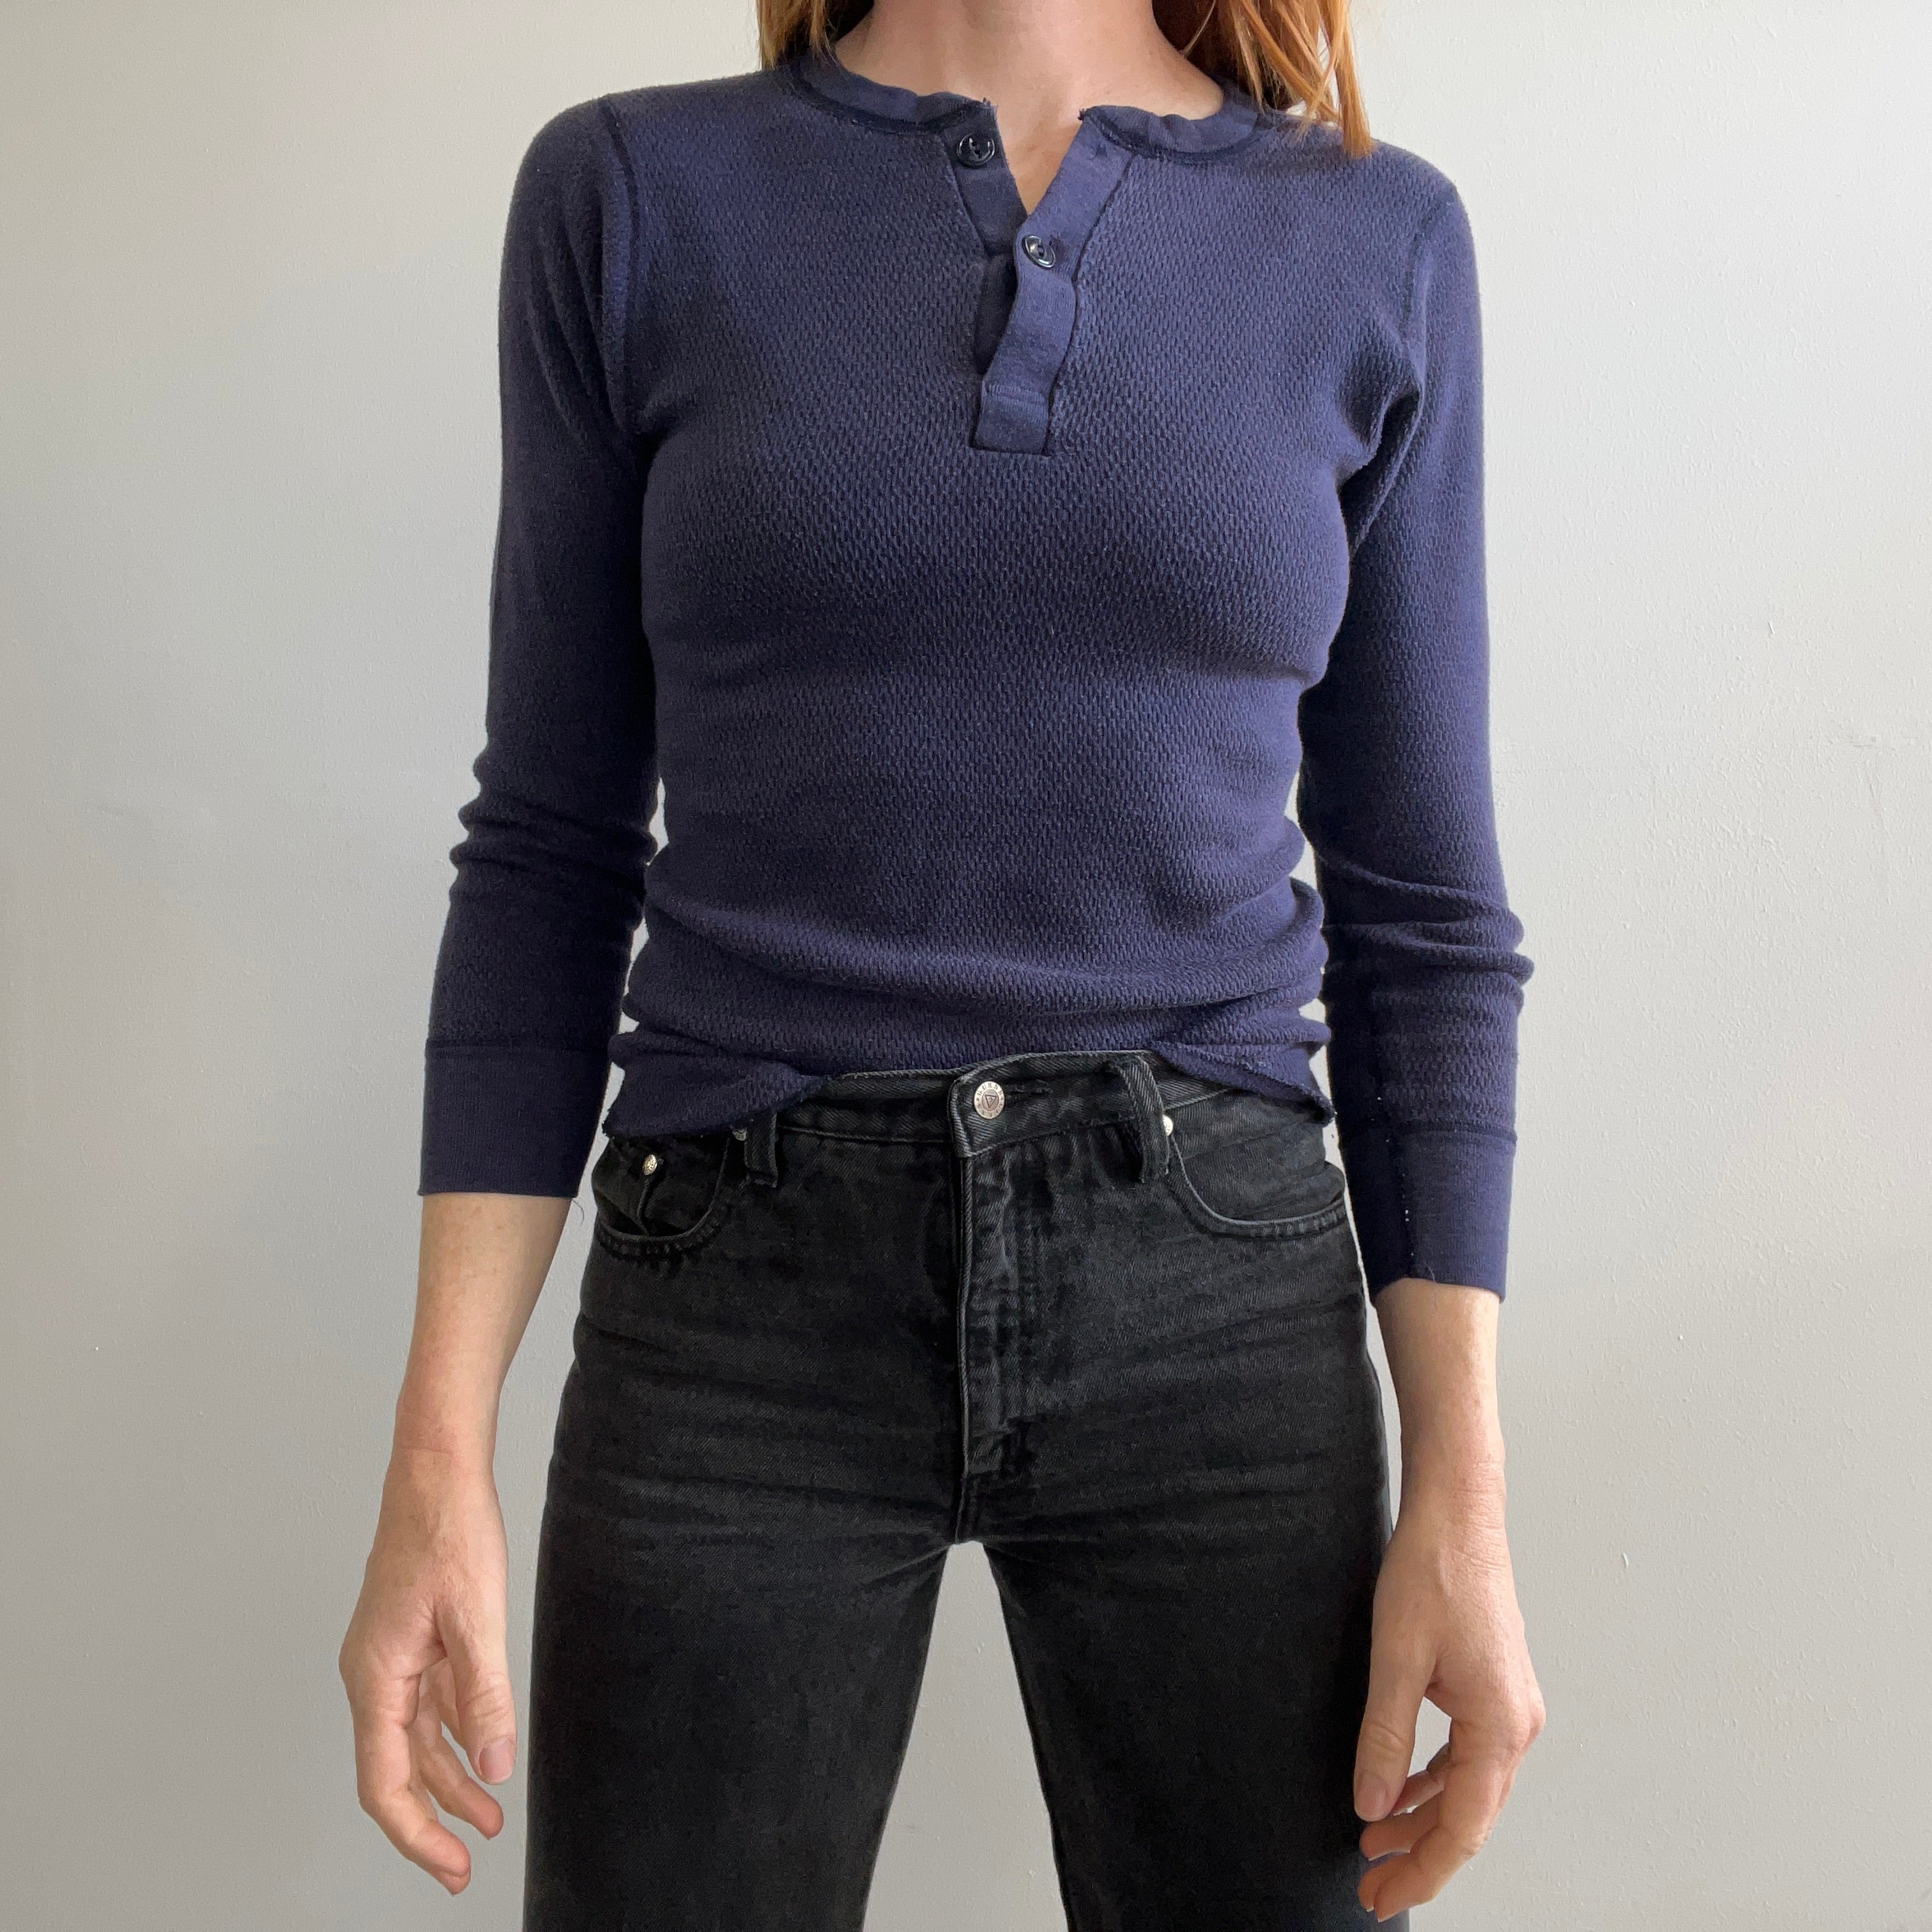 1970s Hanes (Check out the tag!) Navy Henley Thermal